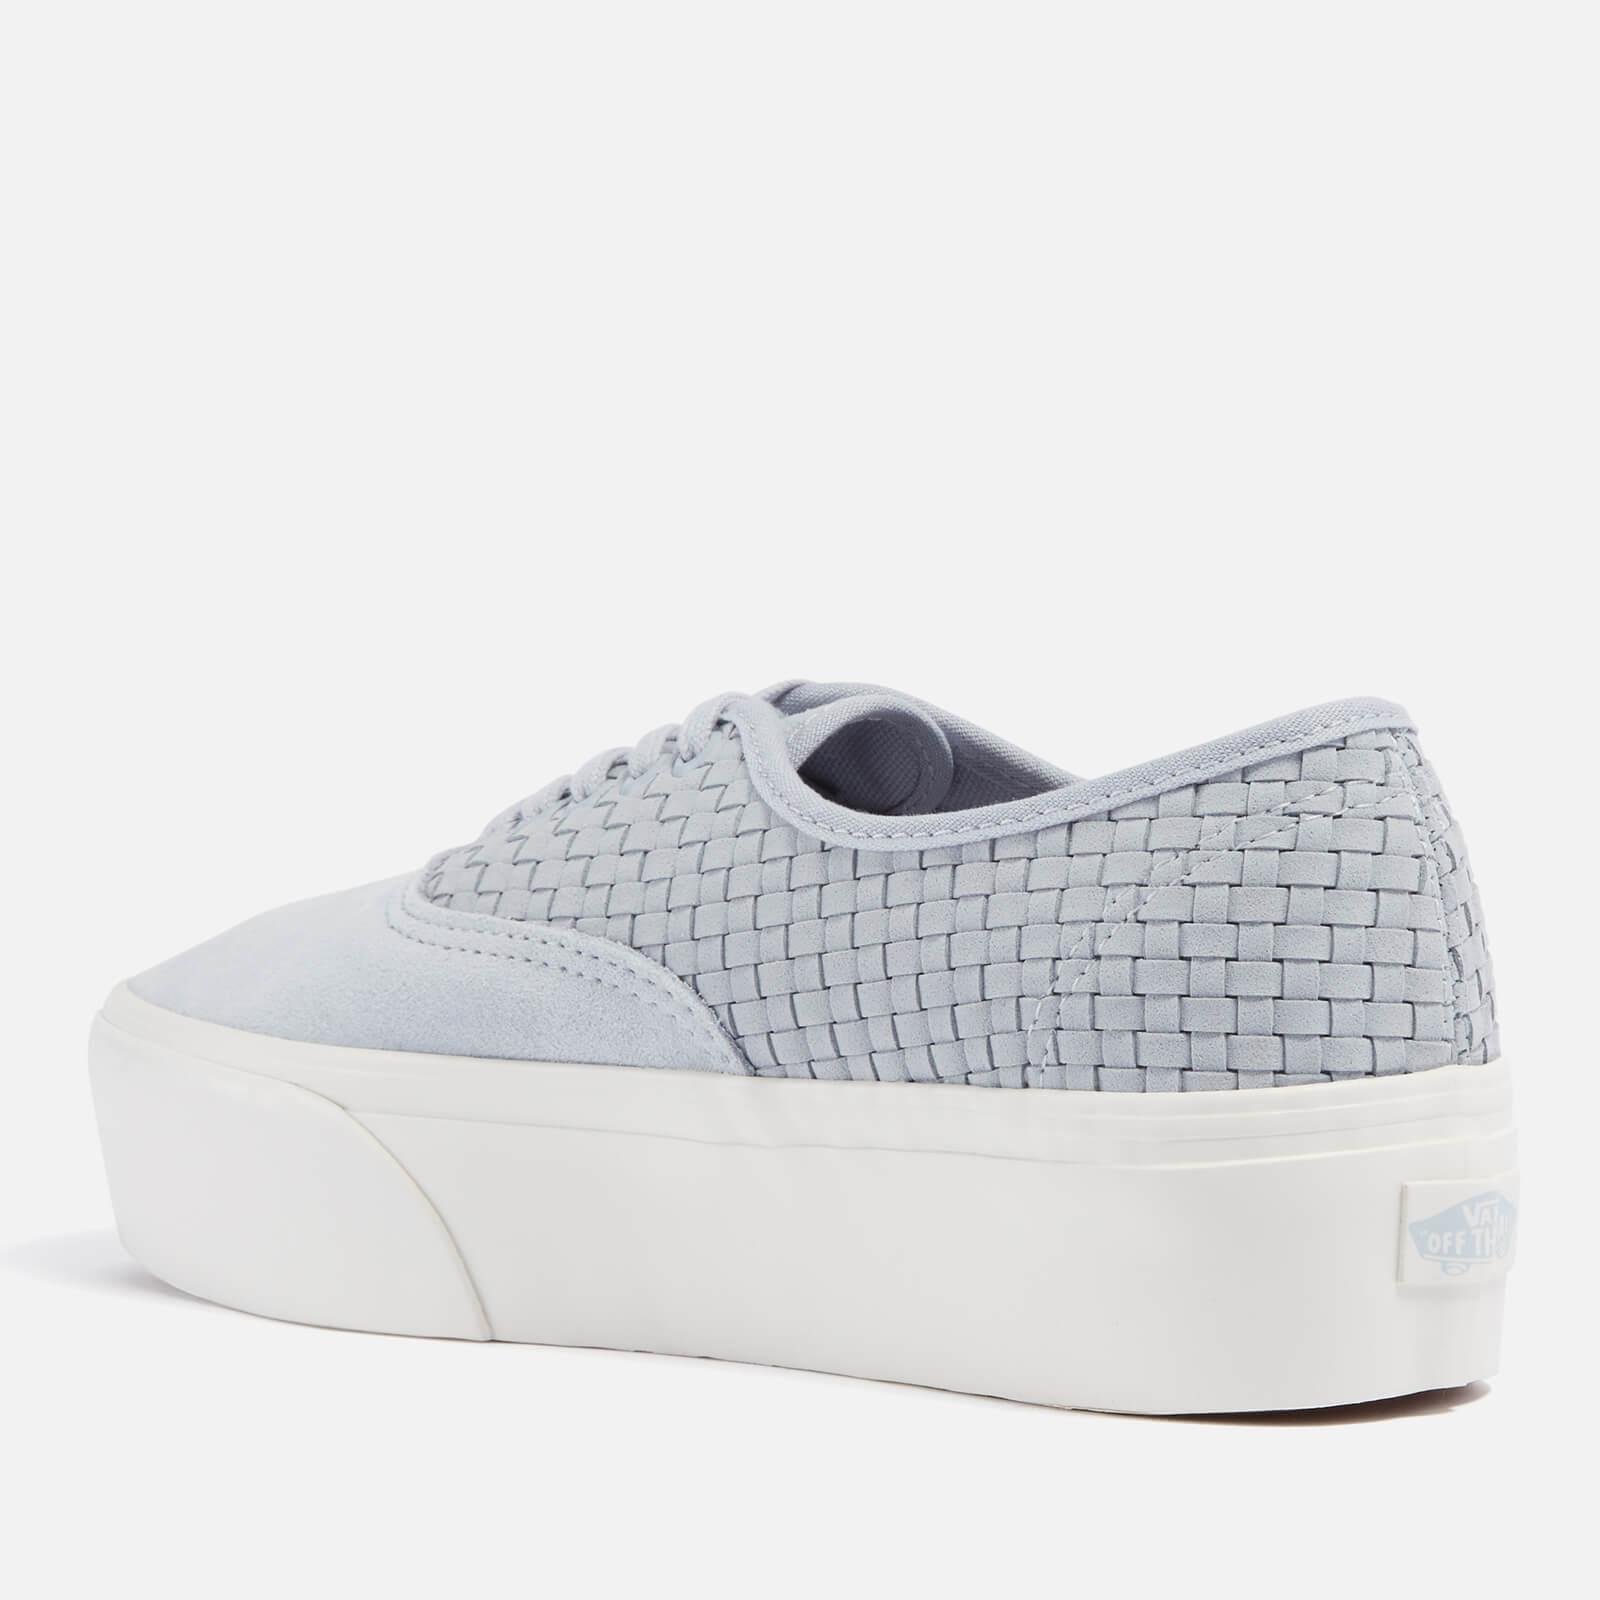 Vans Authentic Stackform Woven Canvas Trainers in White | Lyst